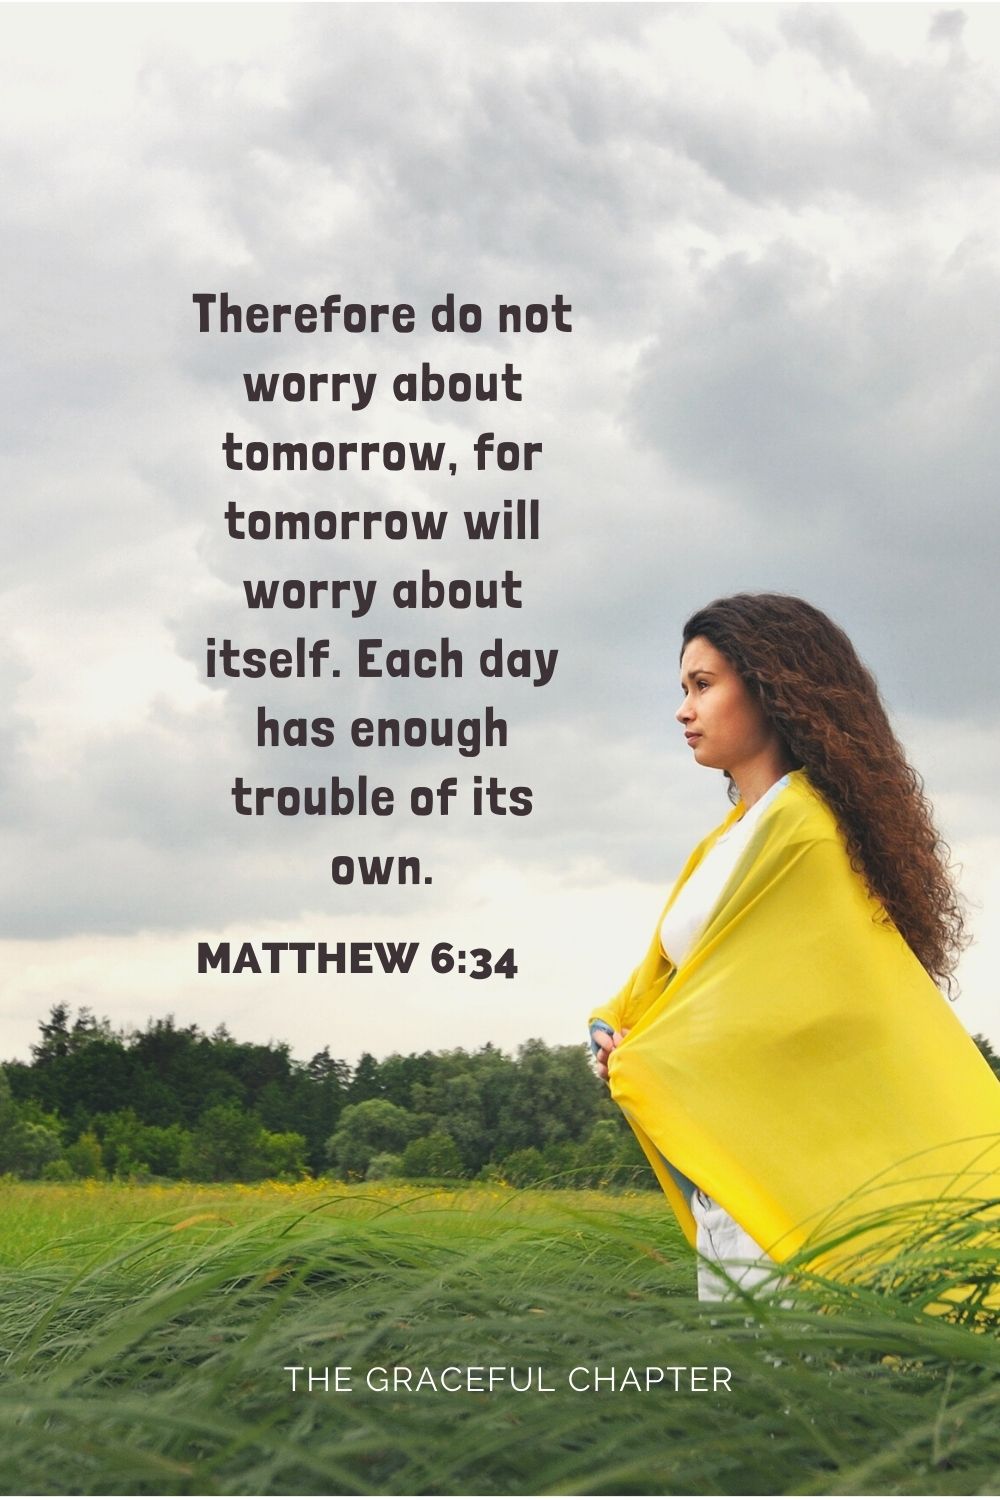 Therefore do not worry about tomorrow, for tomorrow will worry about itself. Each day has enough trouble of its own. Matthew 6:34